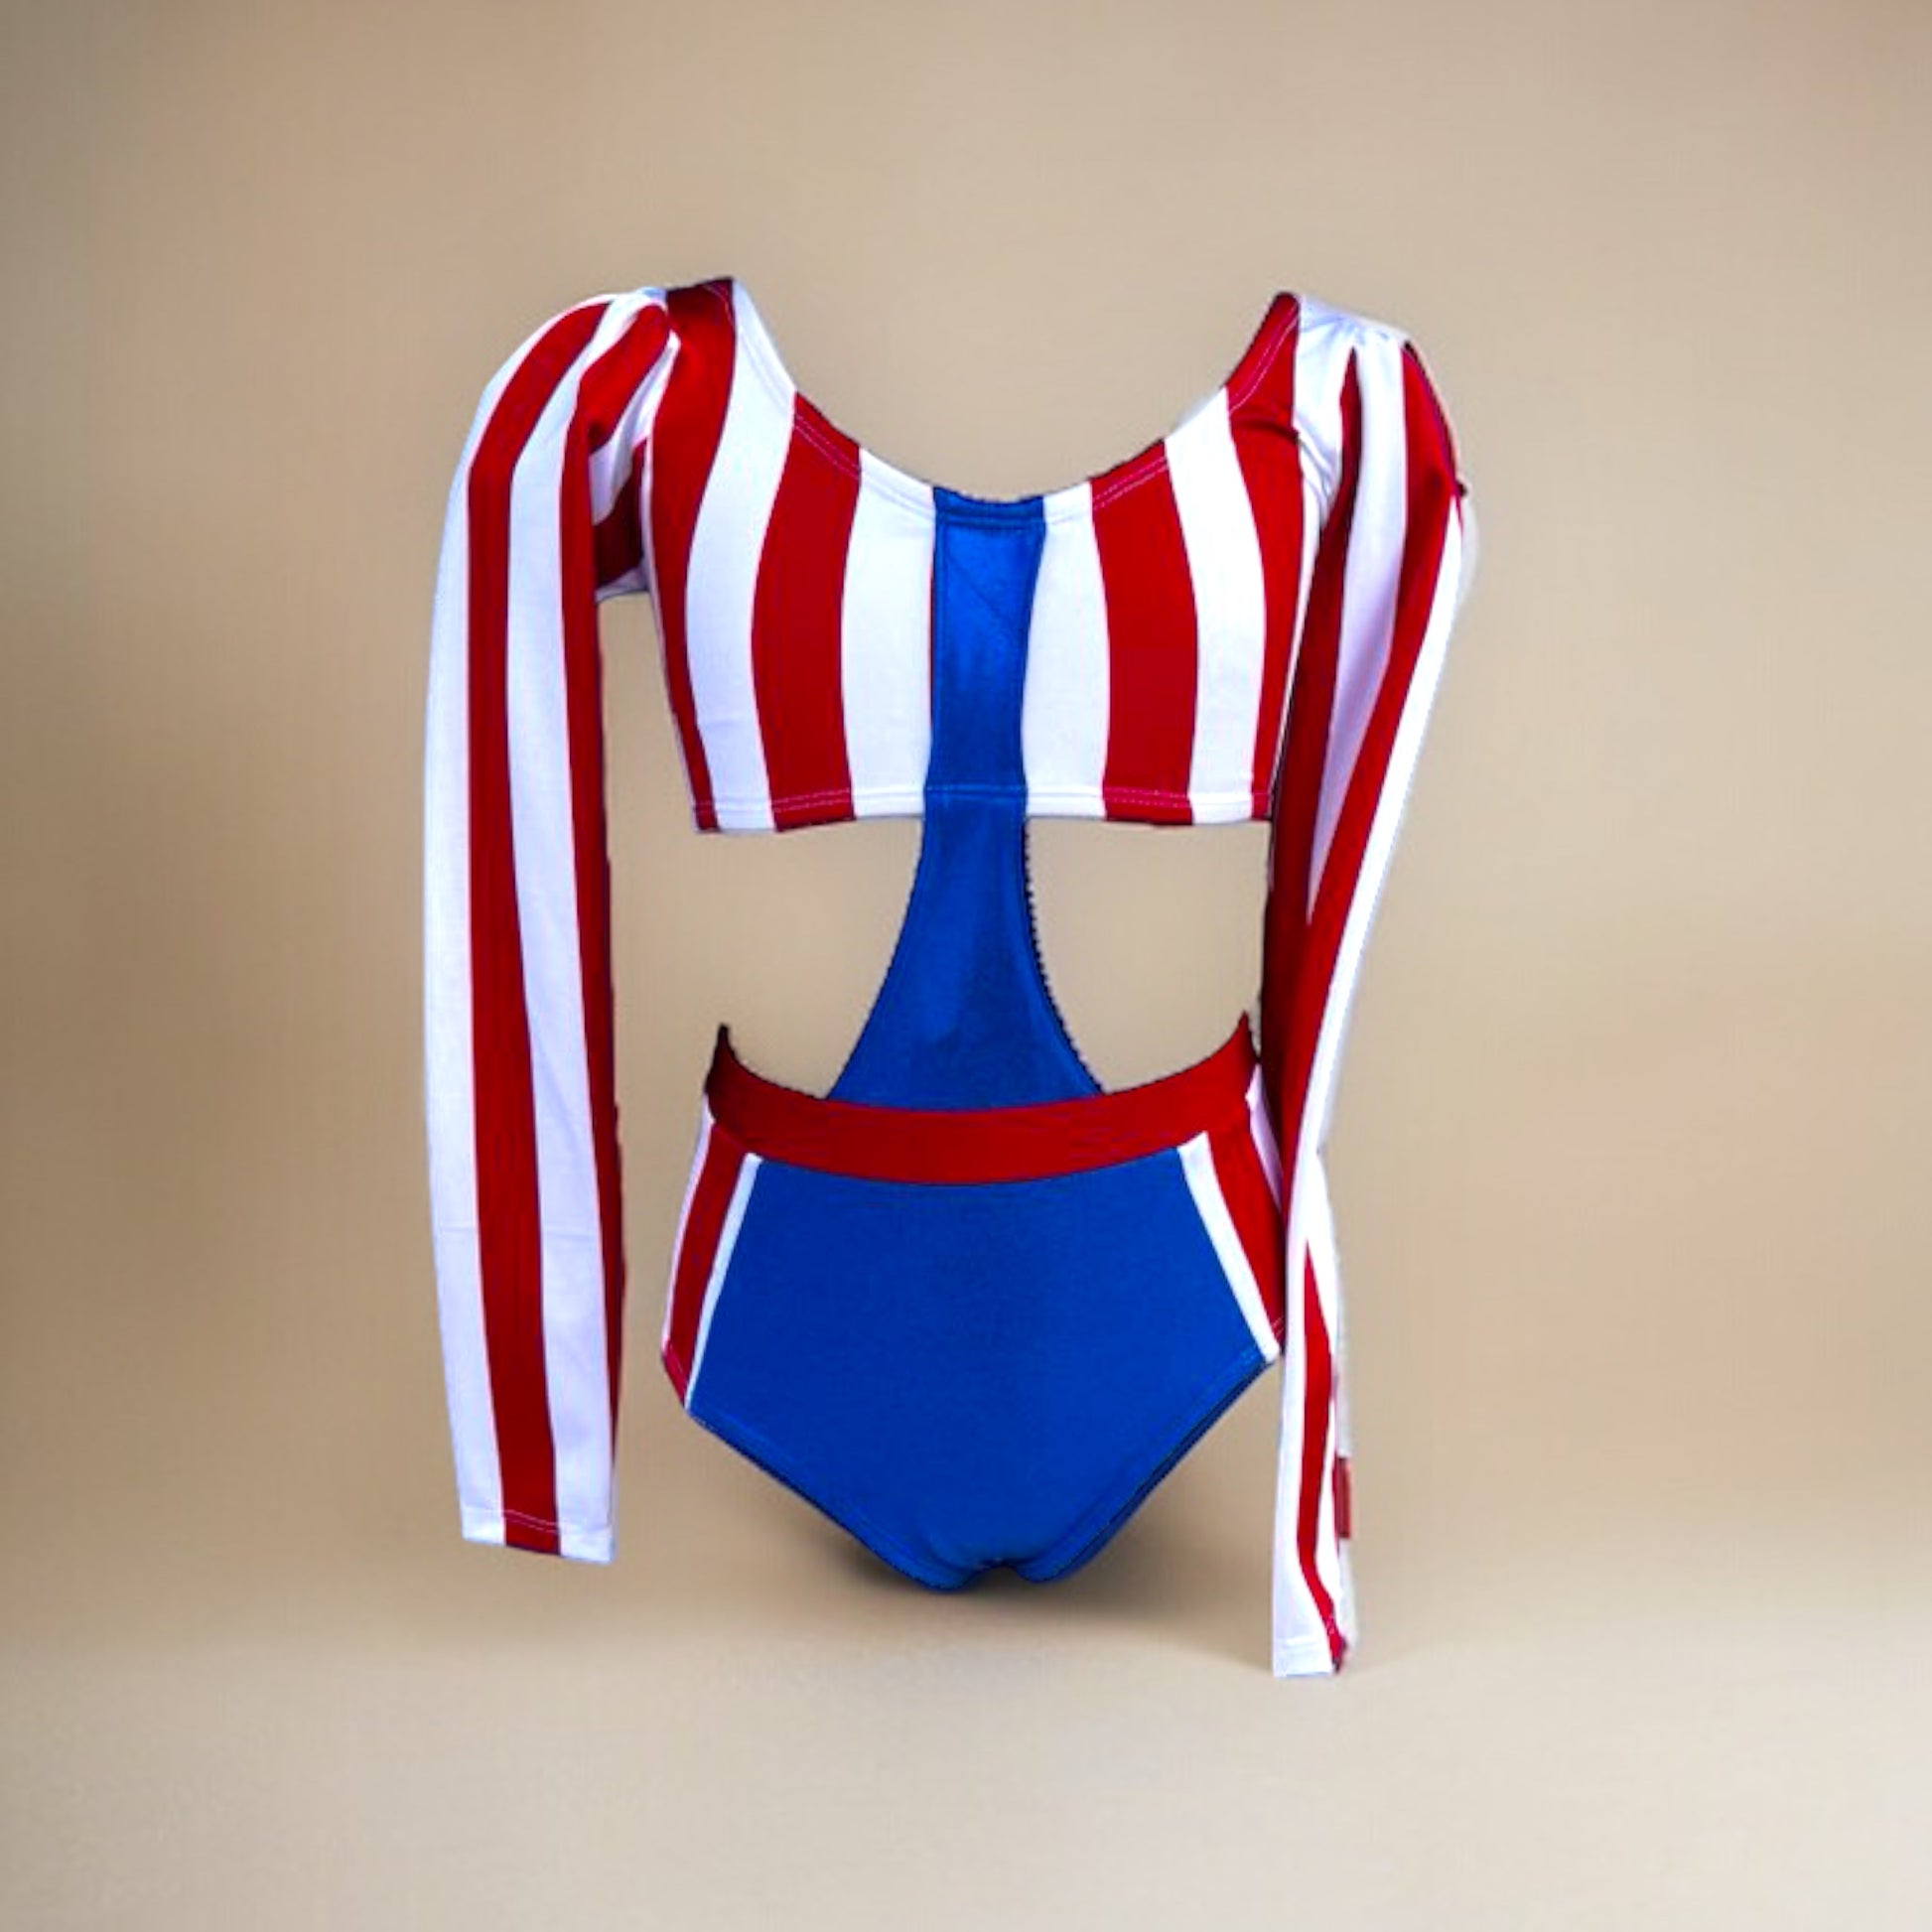 Get ready to rock the stage with our bandstand-inspired leotard! With metallic blue, white, and red stripes, puffed shoulders, and a high-waisted faux two-piece design, this show-stopping ensemble will make every performance a hit. Unleash your inner diva and dance with attitude in this unstoppable leotard by Opra Dancewear.